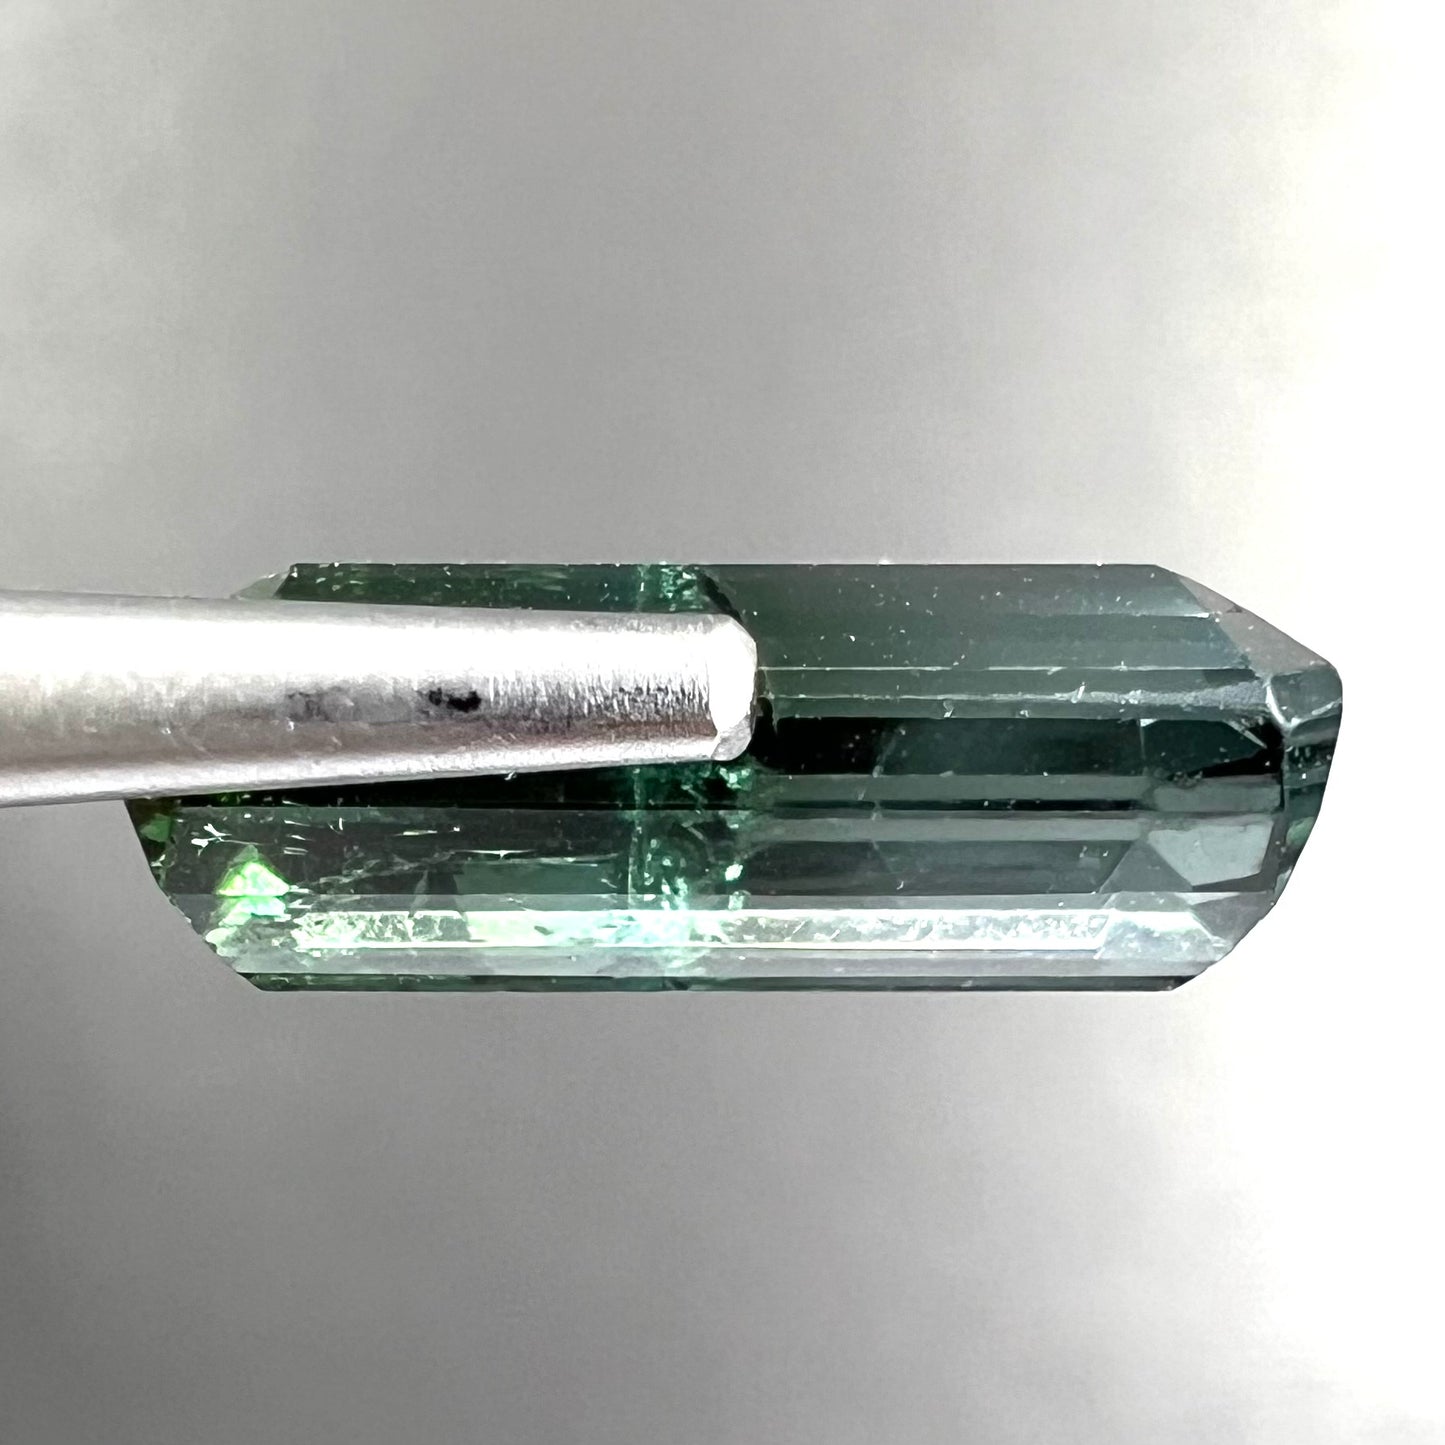 A loose, emerald cut bicolor tourmaline stone.  The colors blend from green to blue-green to sttel blue.